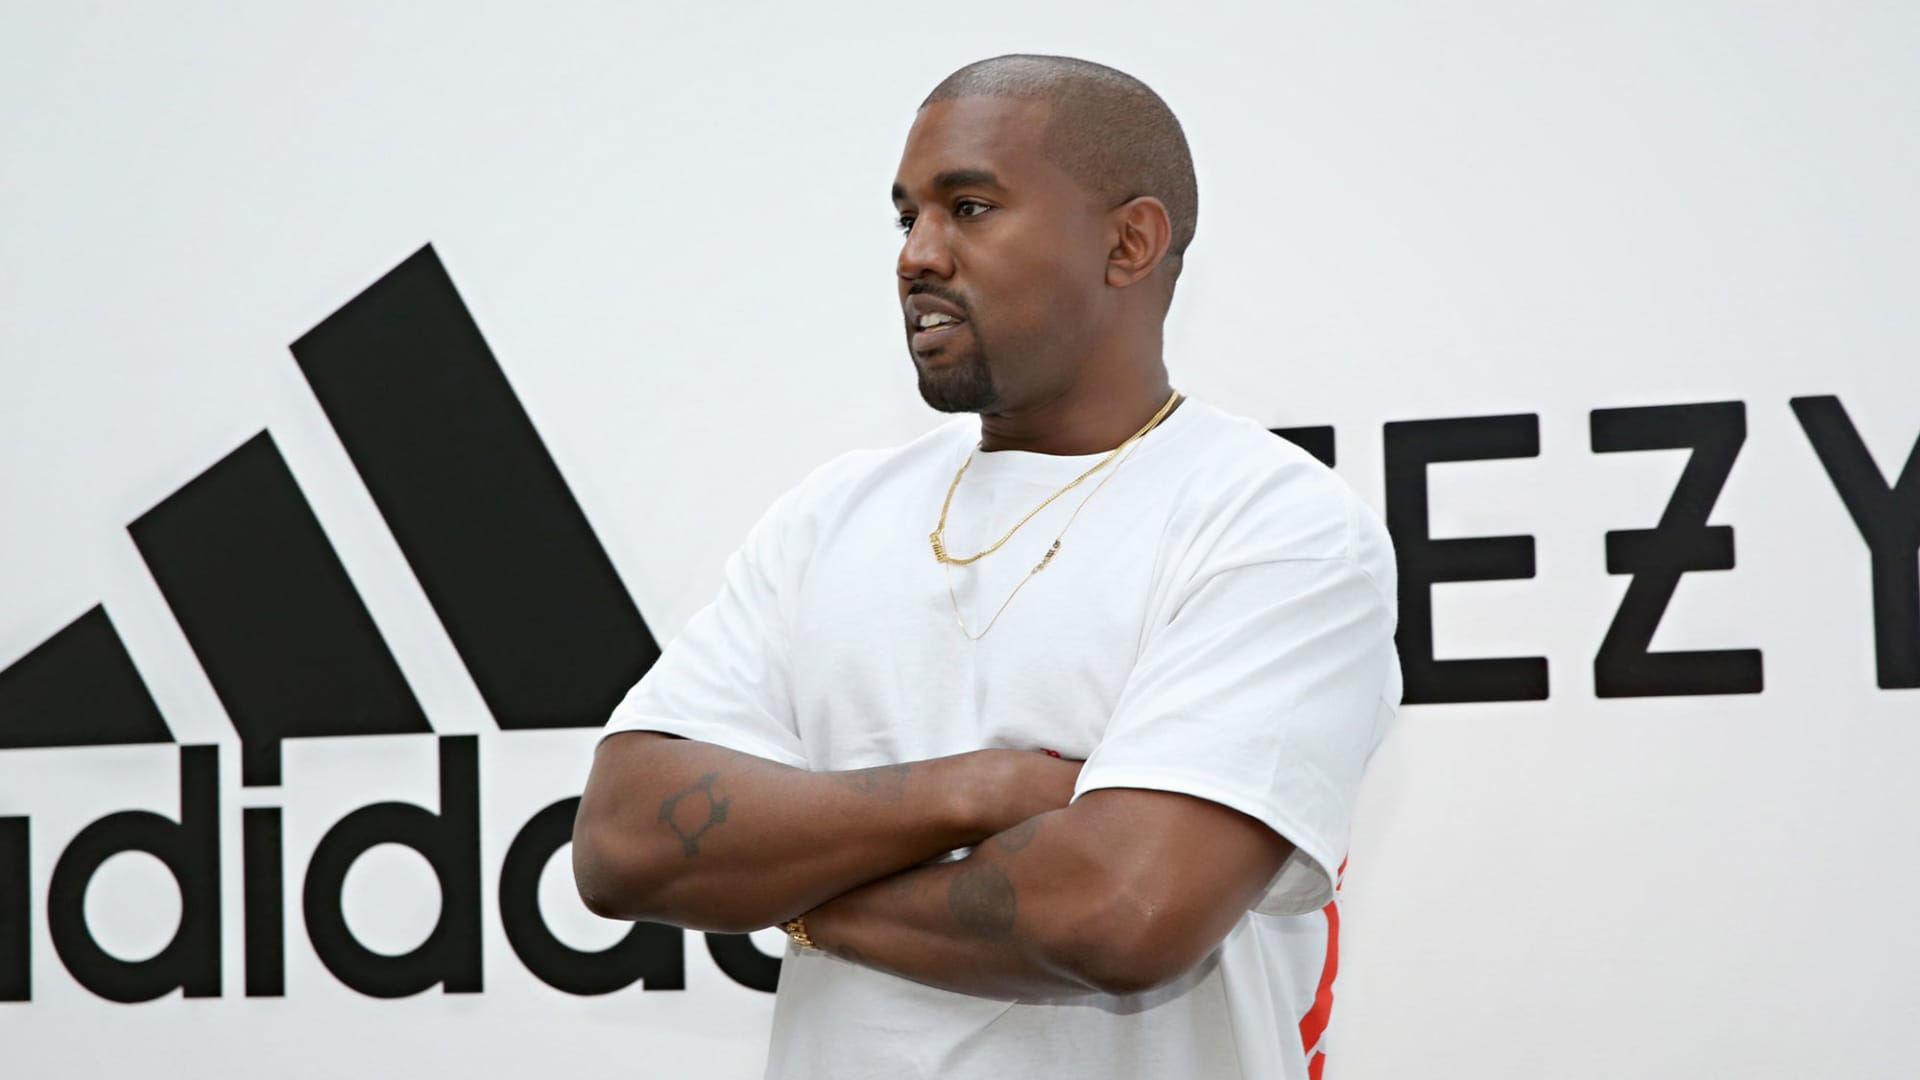 Adidas says its relationship with Kanye West is under review